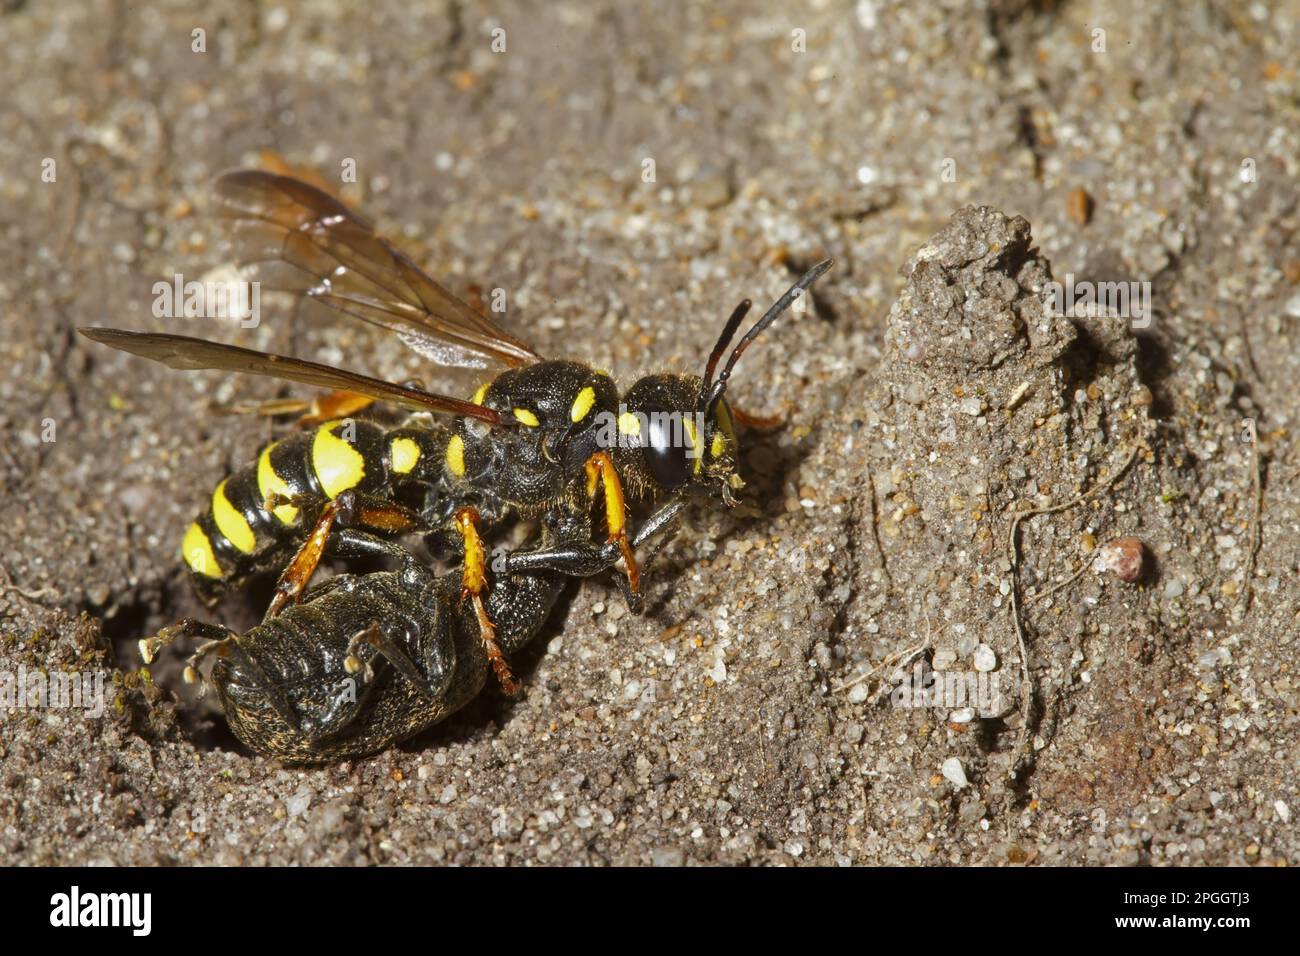 Sand knot wasp (Cerceris arenaria), Sand knot wasp, Digger wasp, Digger wasps, Other animals, Insects, Animals, Weevil Wasp adult, carrying weevil Stock Photo